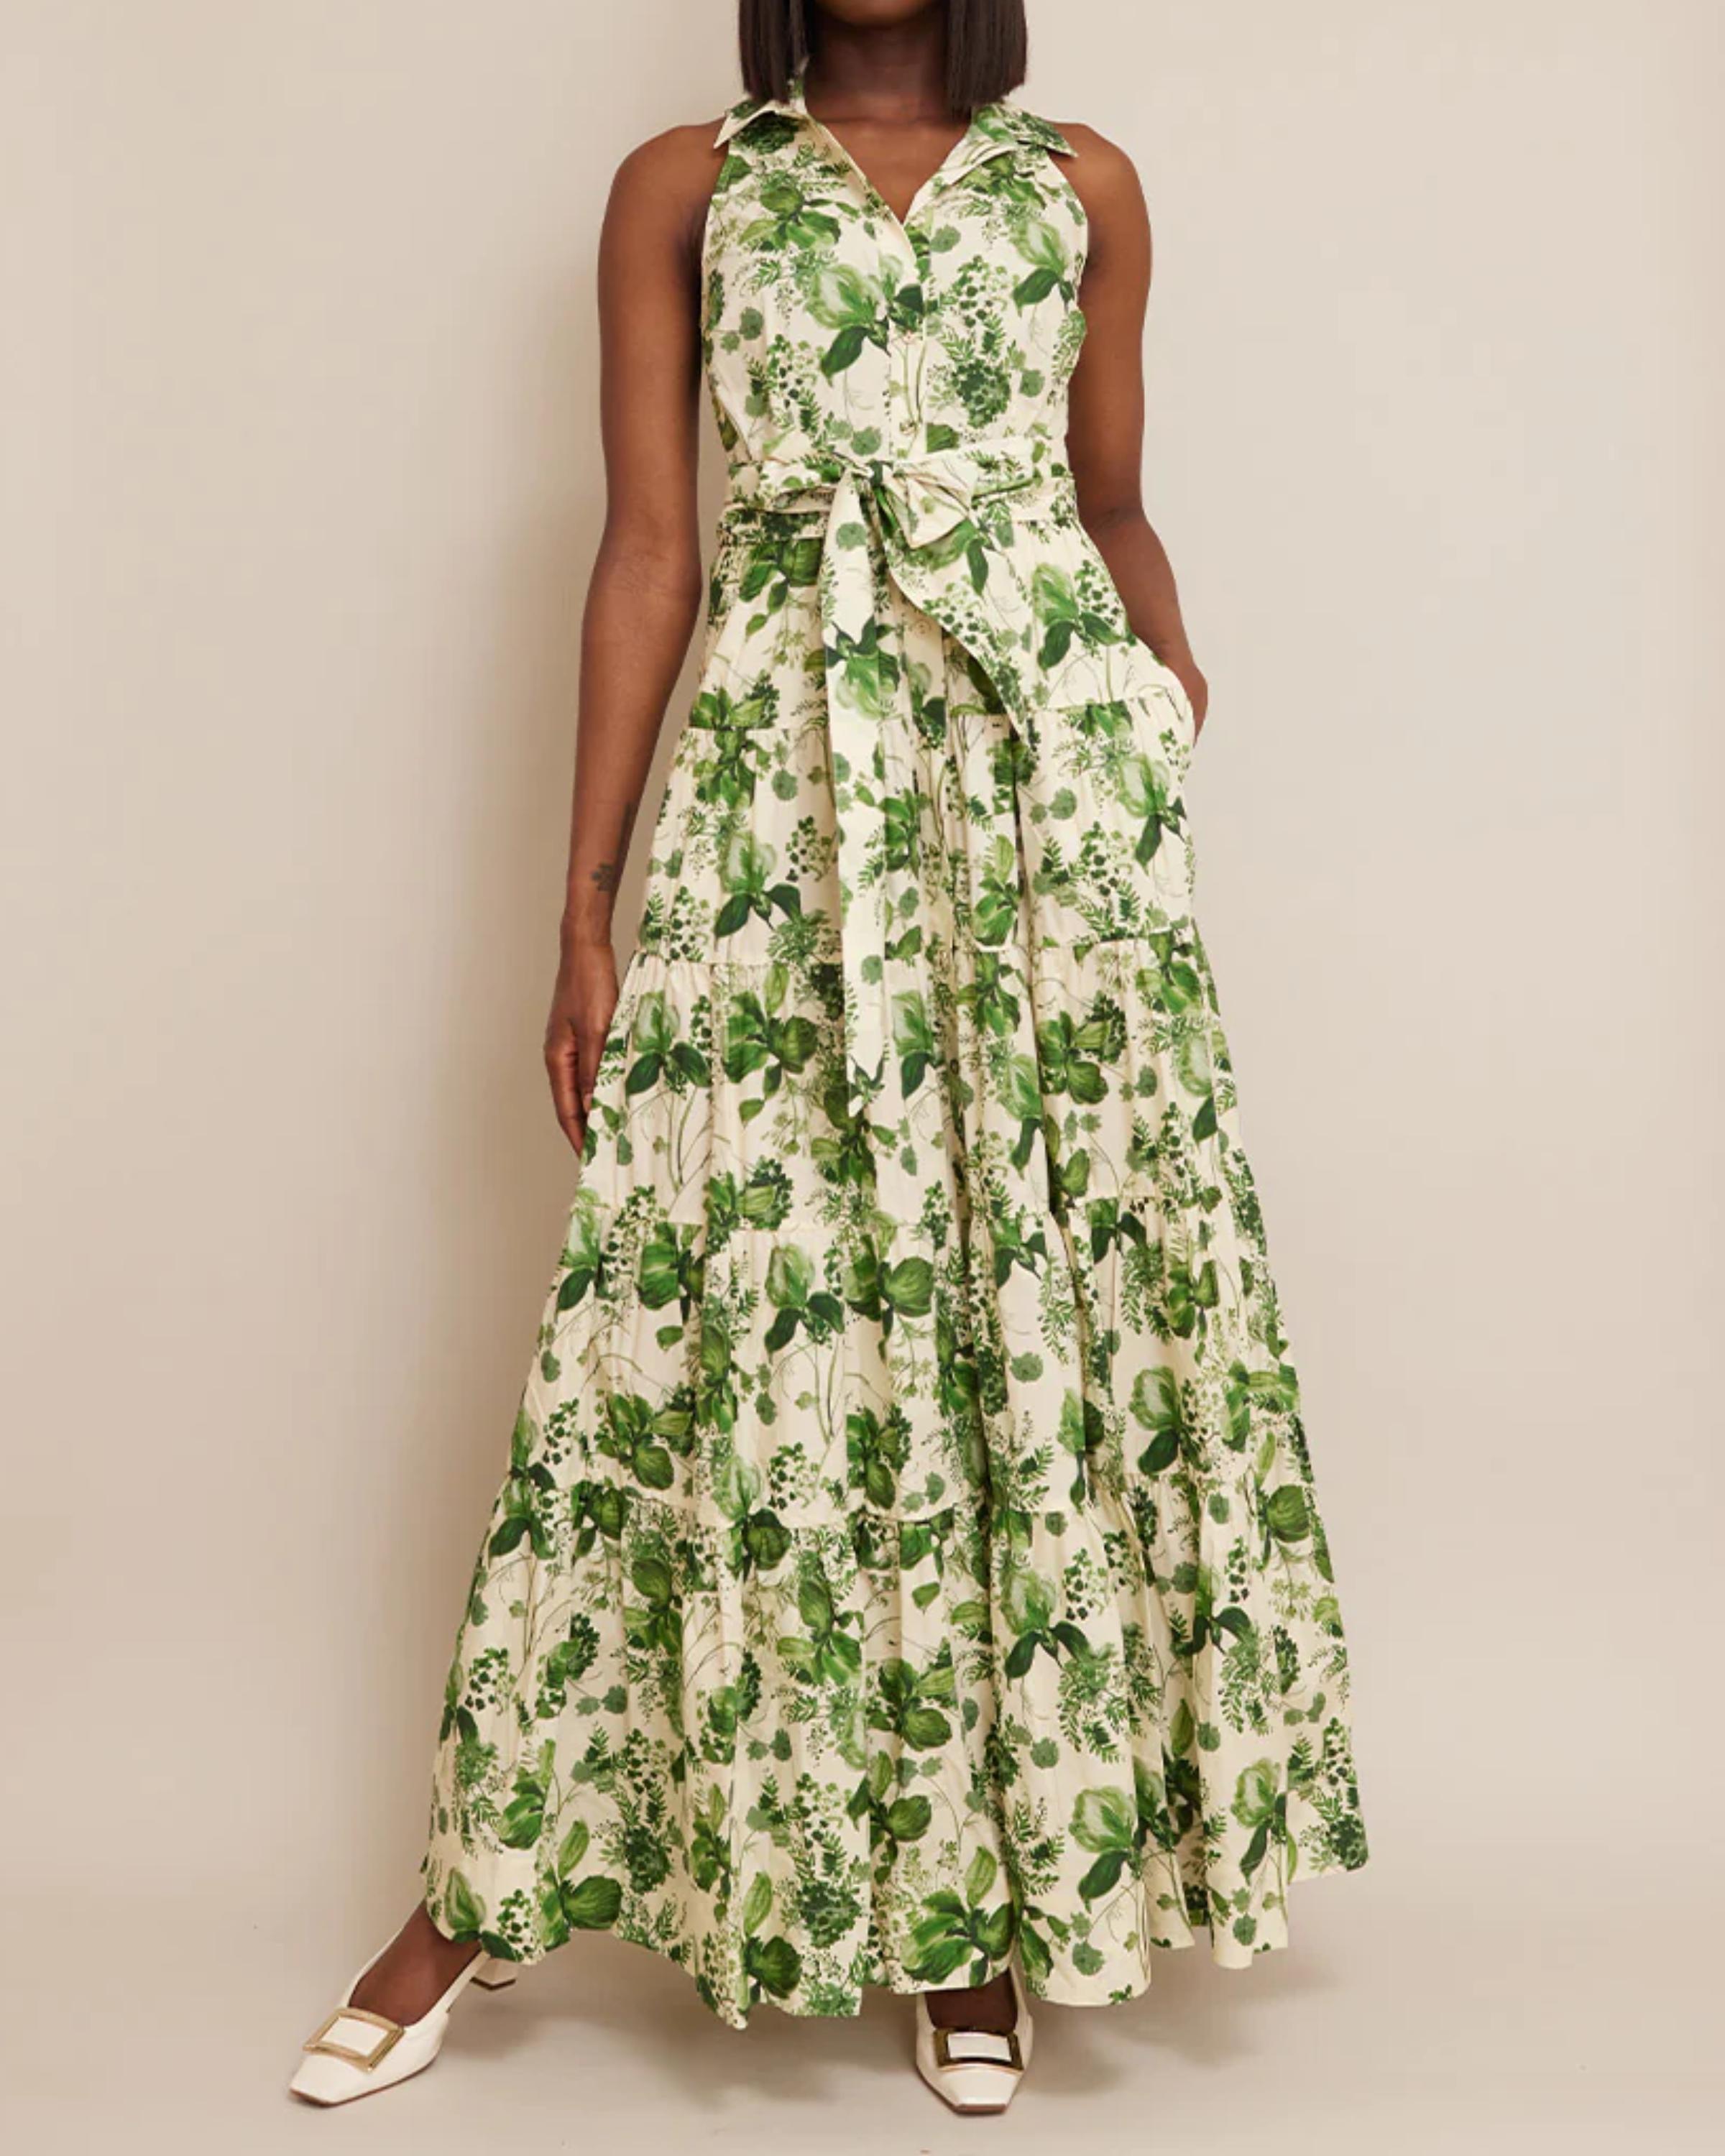 Cara Cara Adriana Dress in Olive Hanging Orchids